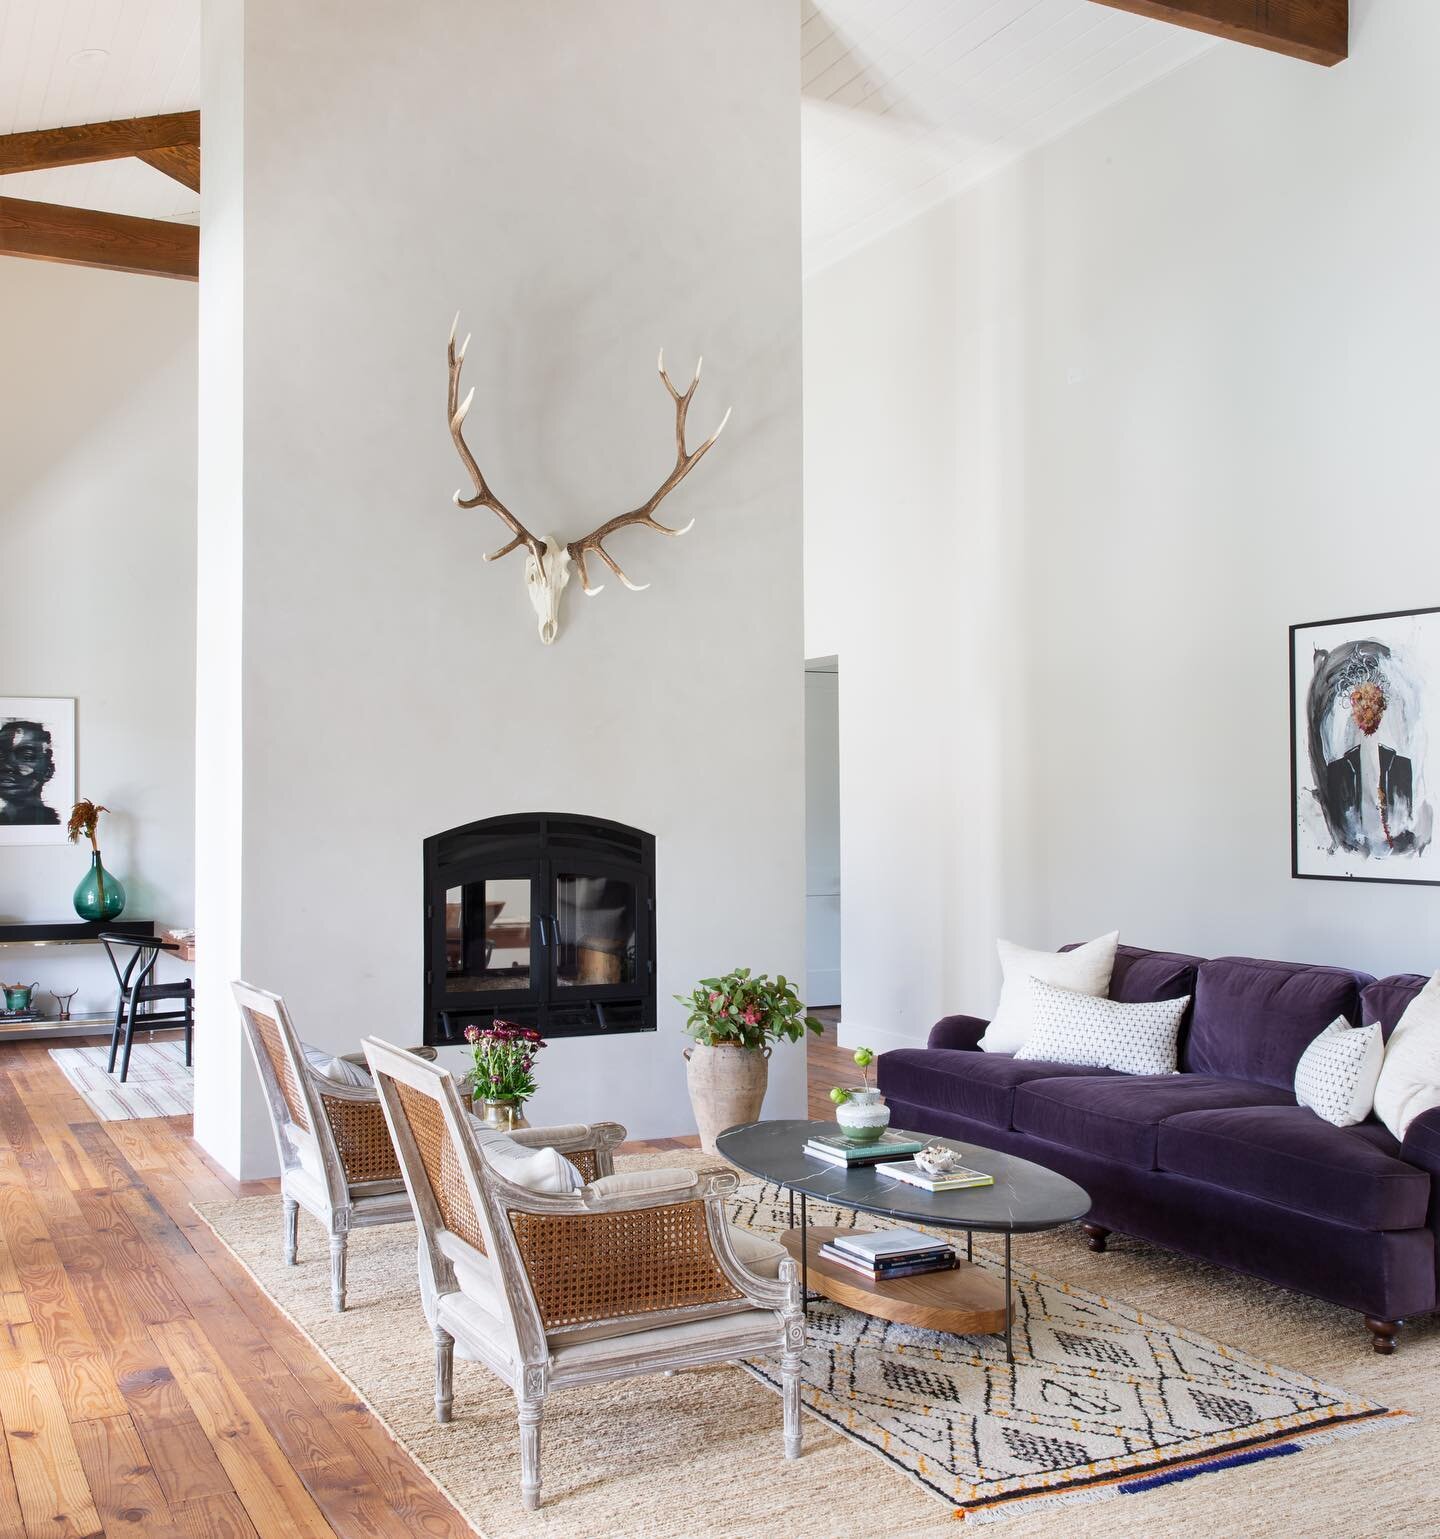 purple people eater sofa and lots of one of a kind finds in this great room // love this client and project so much 💫 photo by @mollyculverphotography #SEI2019 #florencetxfarmhouse